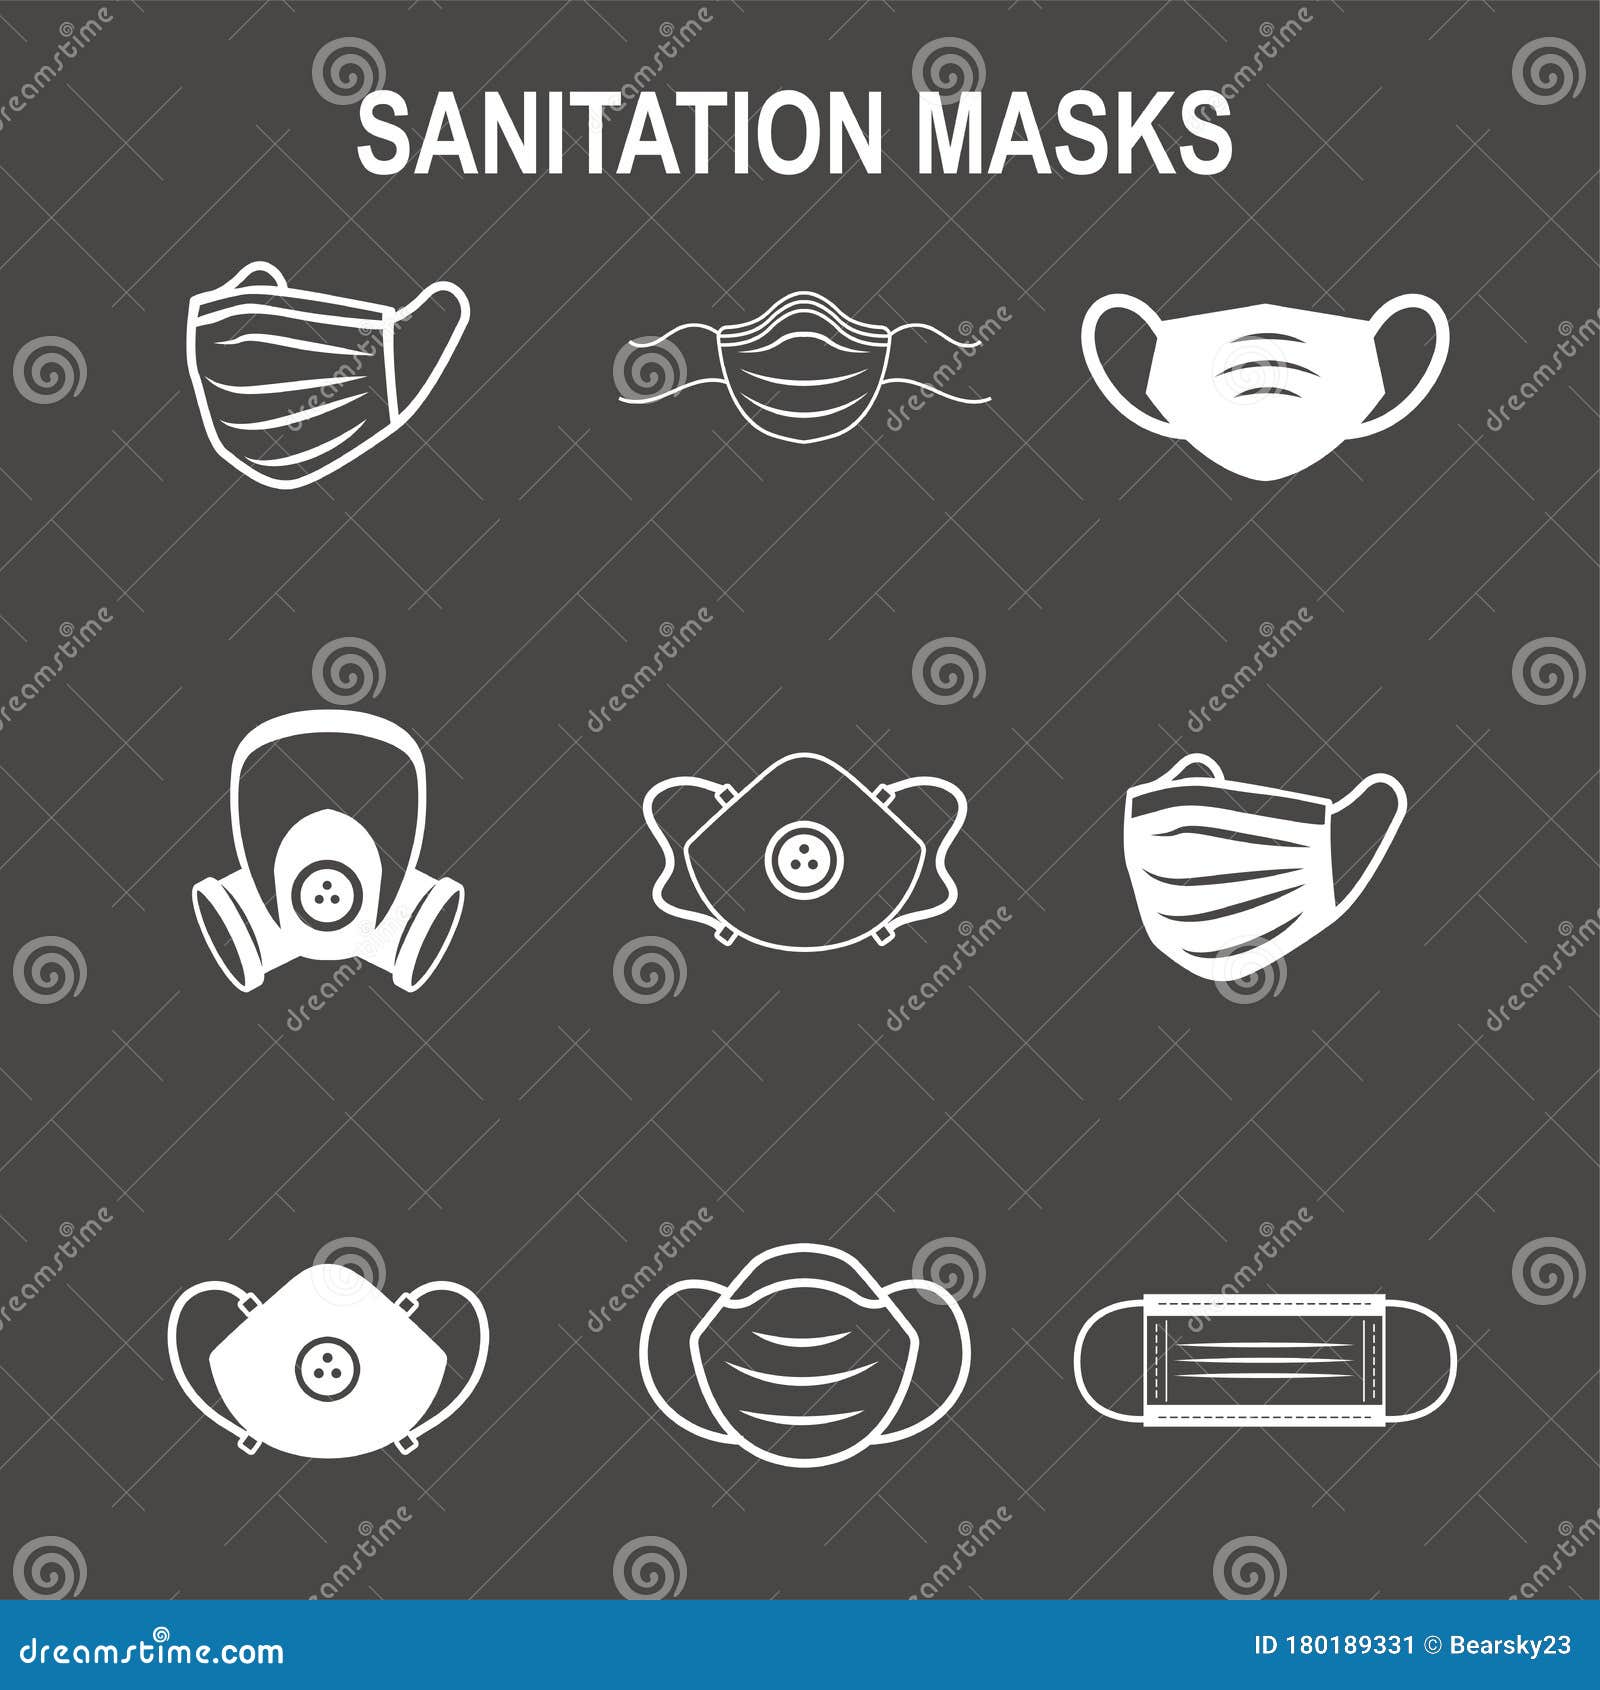 sanitation and protection facemask ppe icon set w respiratory face masks